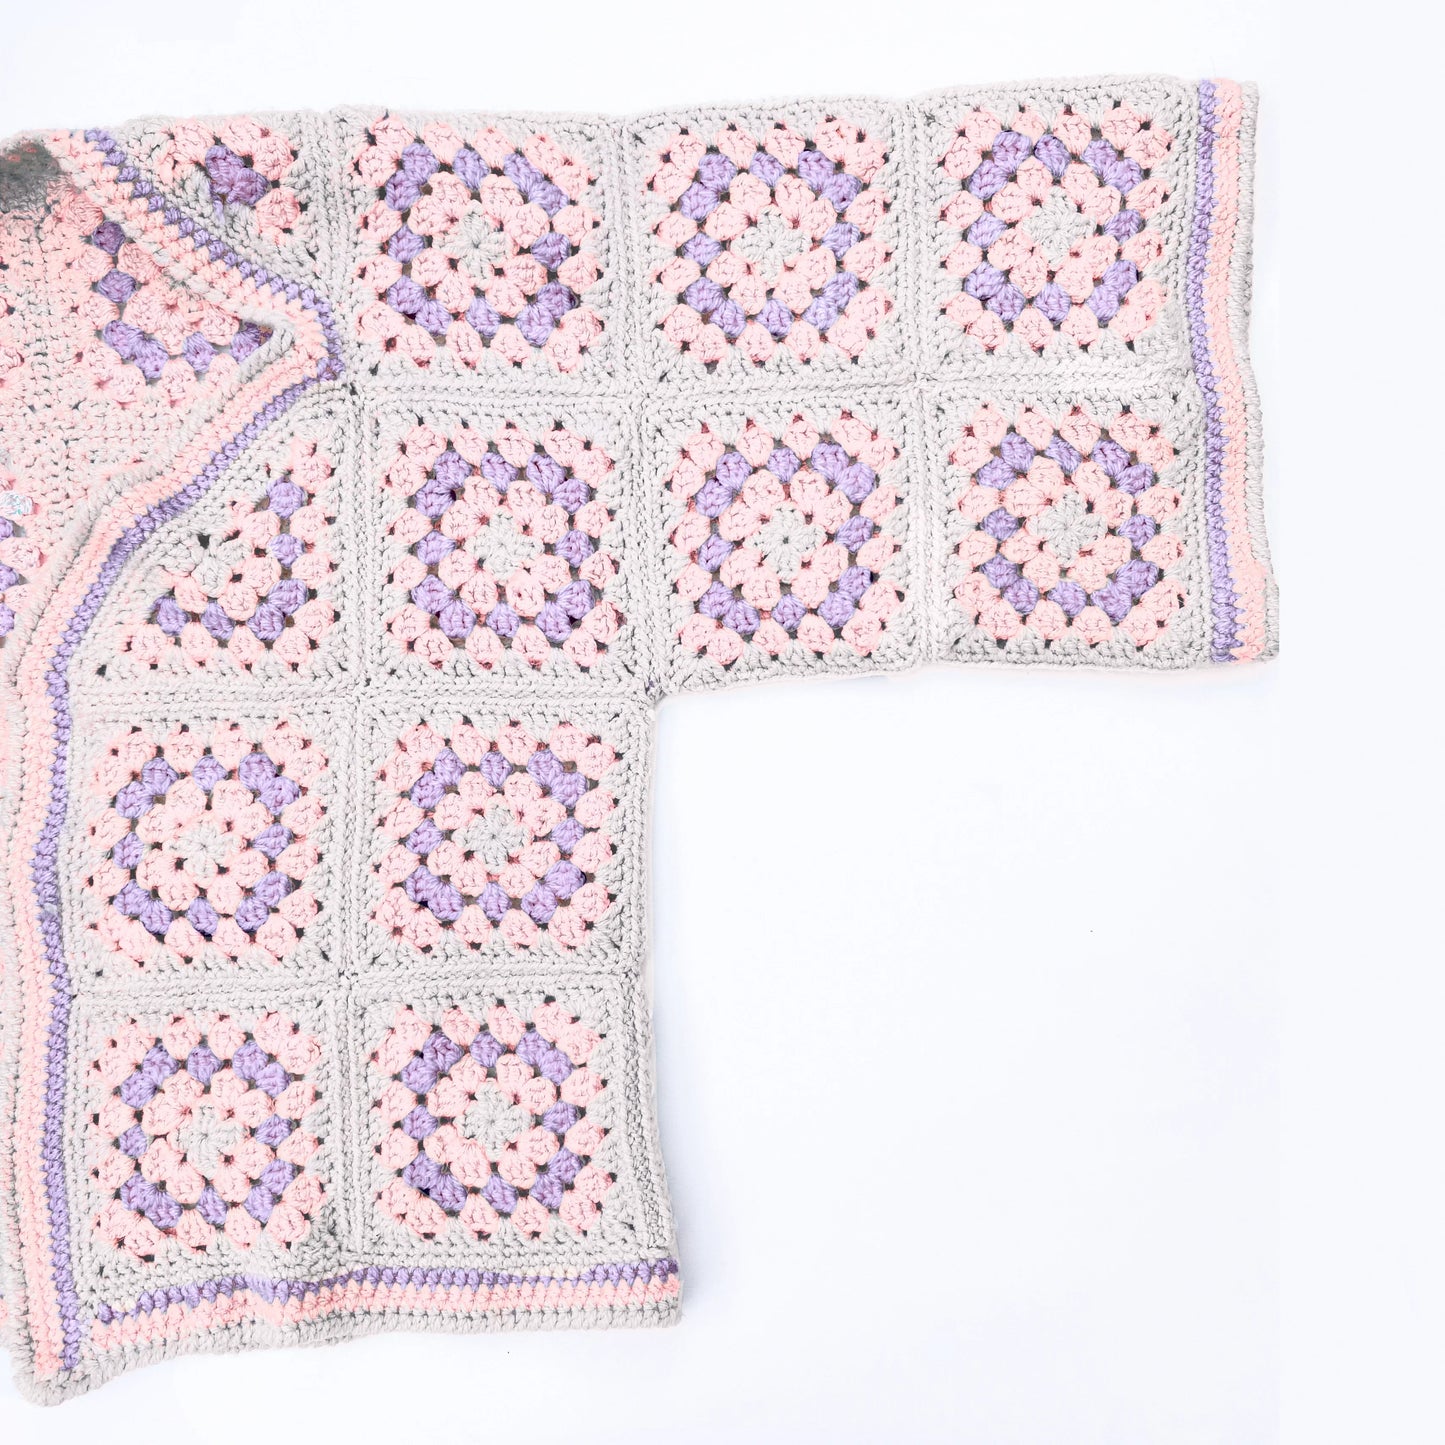 Granny Squares for Beginners Crochet Workshop, Thatcham, 16th March, 10am